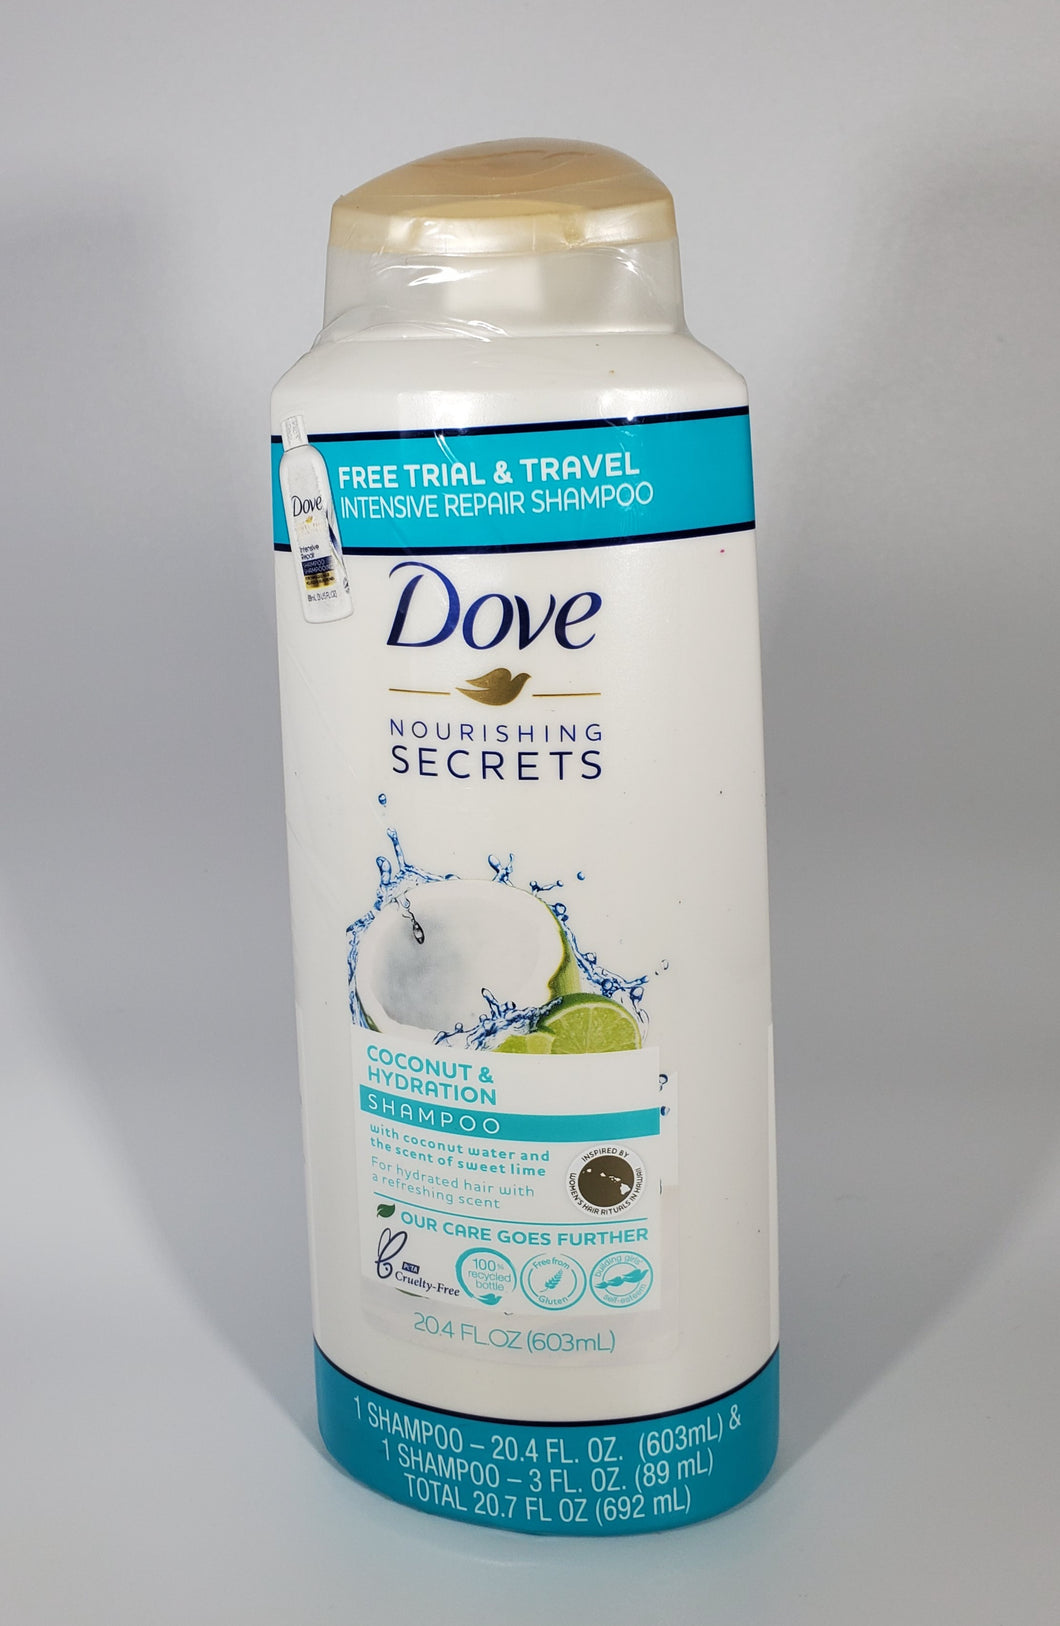 Dove Nourishing Secrets Shampoo for Dry Hair Coconut and Hydration With Refreshing Lime Scent 20.4 oz +3oz Travel